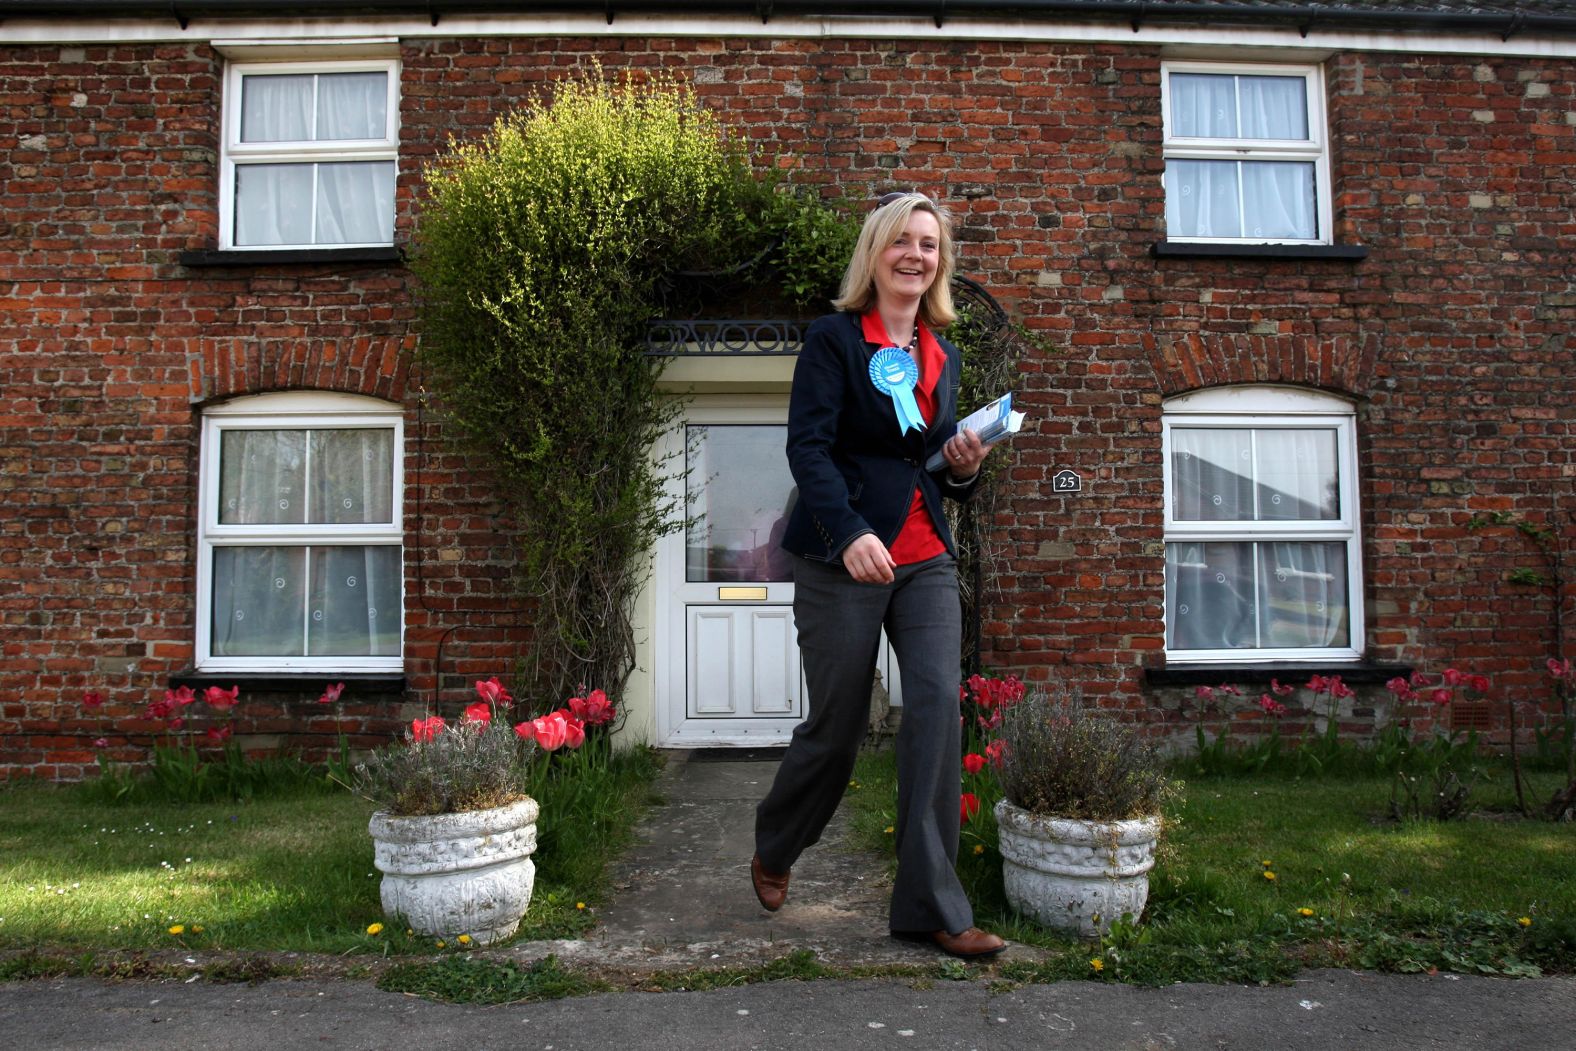 While running for Parliament, Truss canvasses in the village of West Walton in 2010. She was elected later that year. Truss was born in 1975 into a family that she herself has described as "to the left of Labour," Britain's main left-wing party. She grew up in parts of the UK that didn't traditionally vote Conservative, moving between Scotland and the north of England.